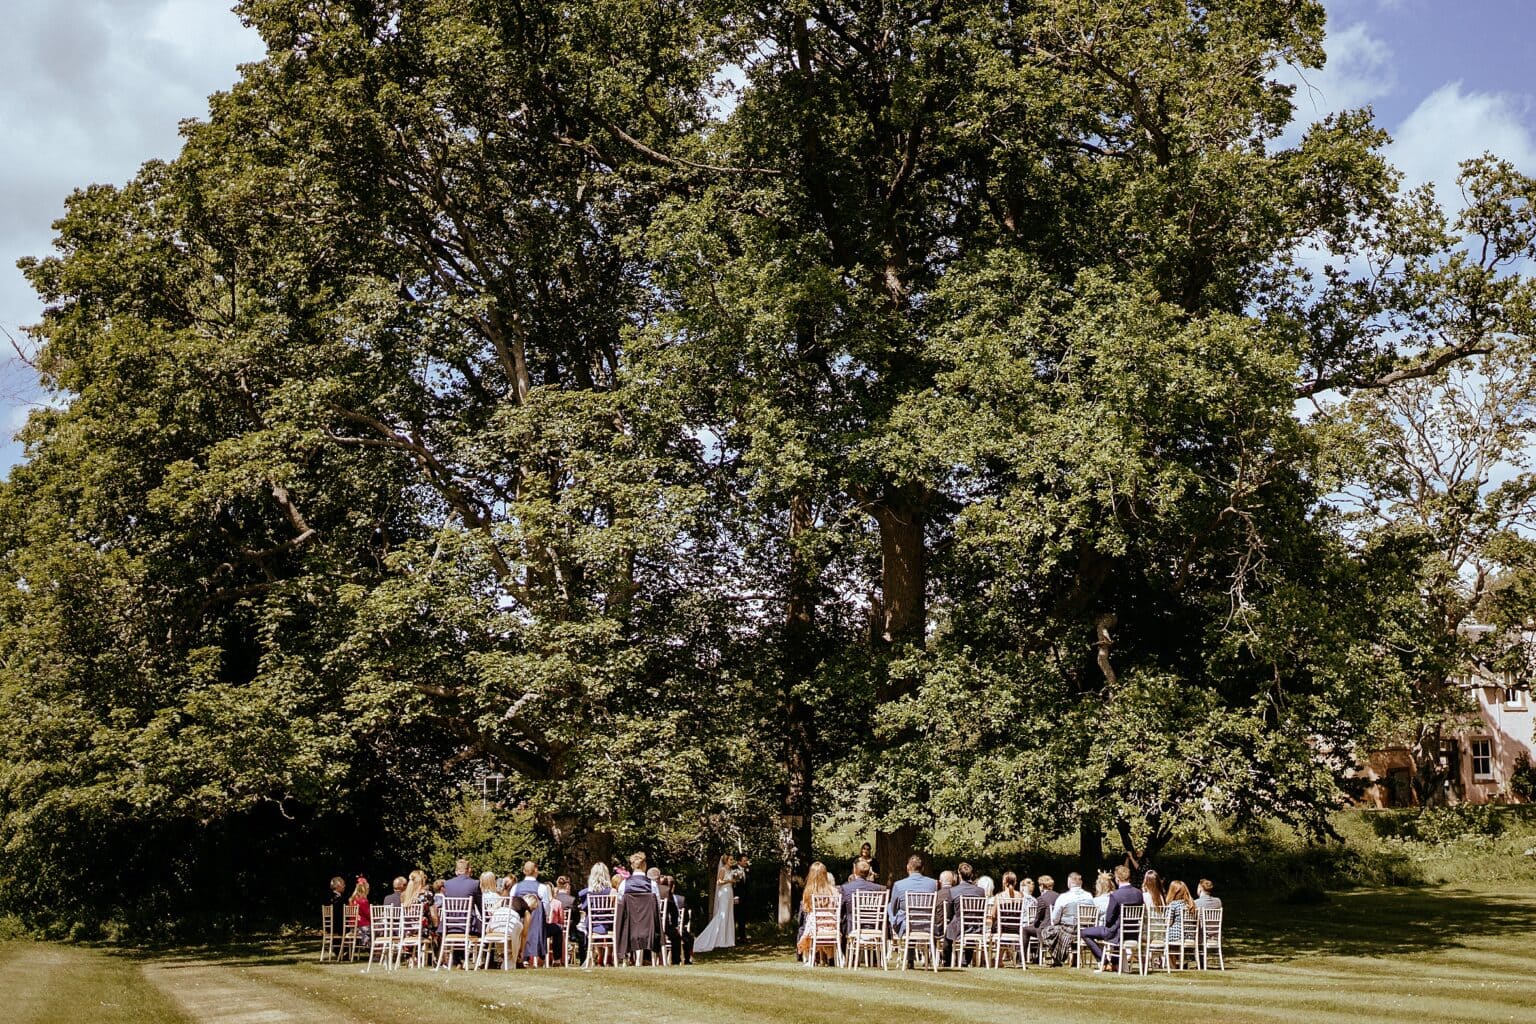 view from behind of everyone sitting at outdoor ceremony on grass lawn in front of big green trees colstoun house wedding unique venues scotland unique wedding venue scotland